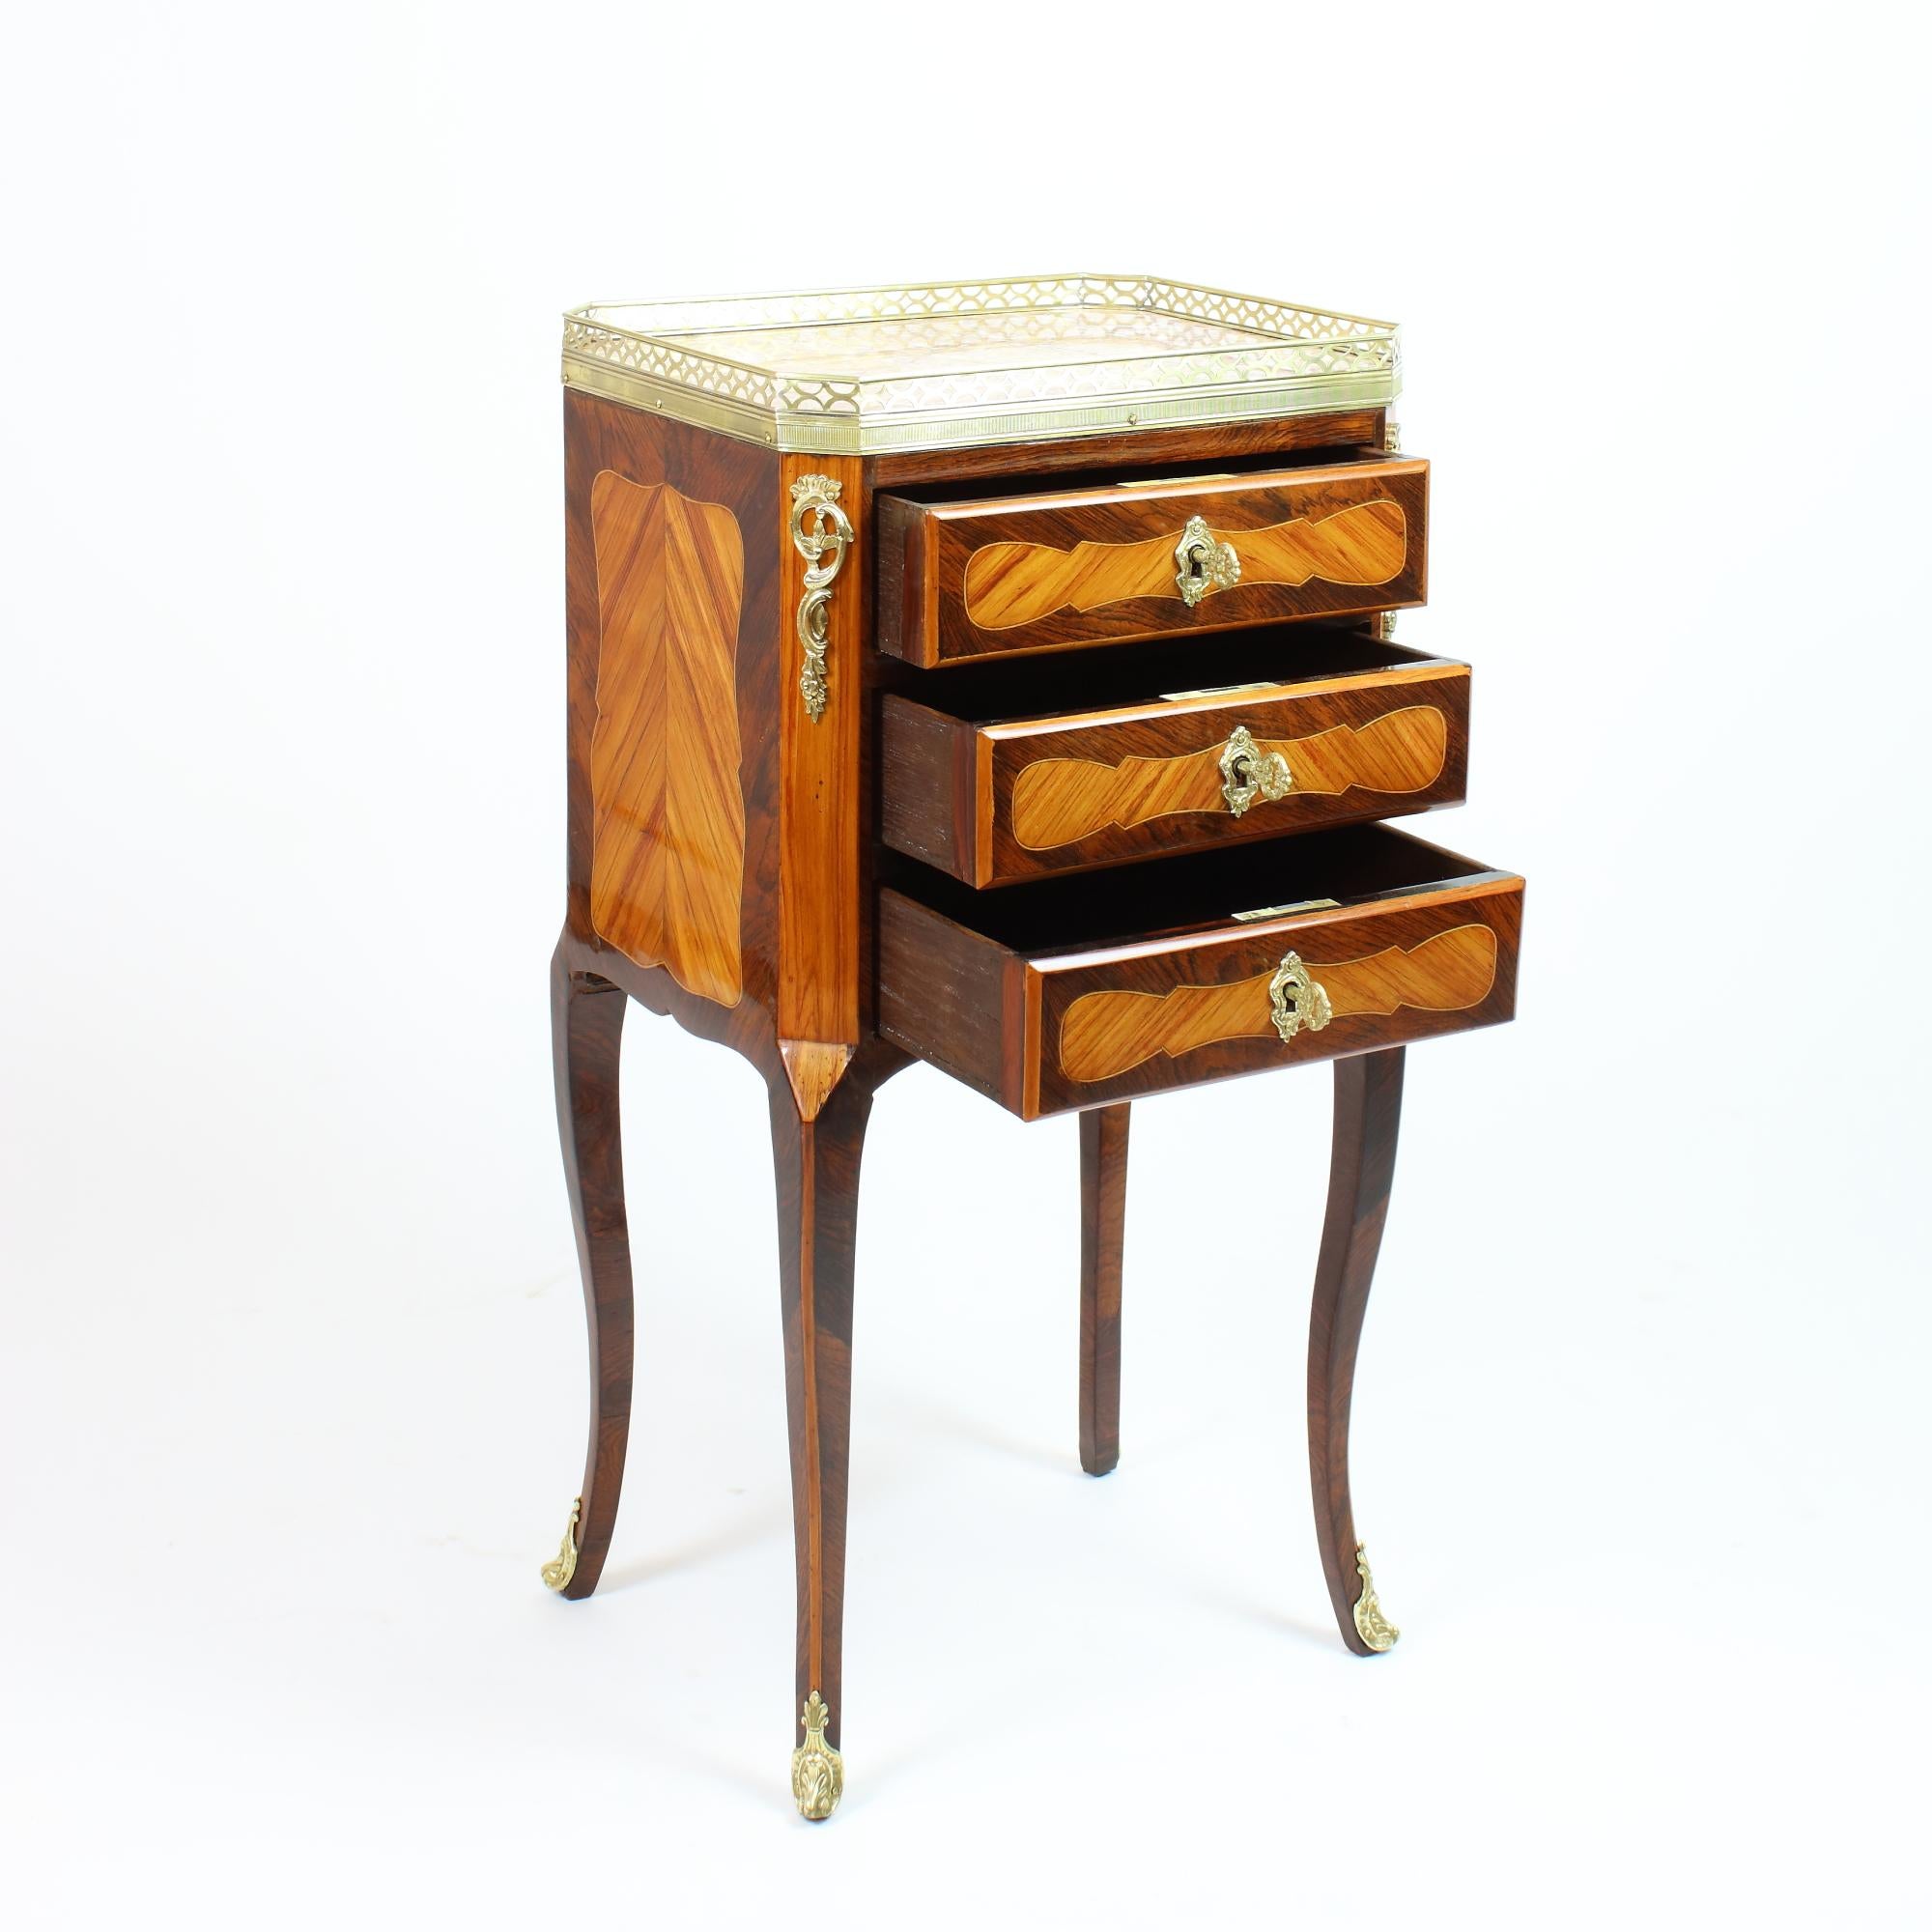 Gilt 18th Century French Transition/Louis XVI Marquetry Side Table/Table Chiffonière